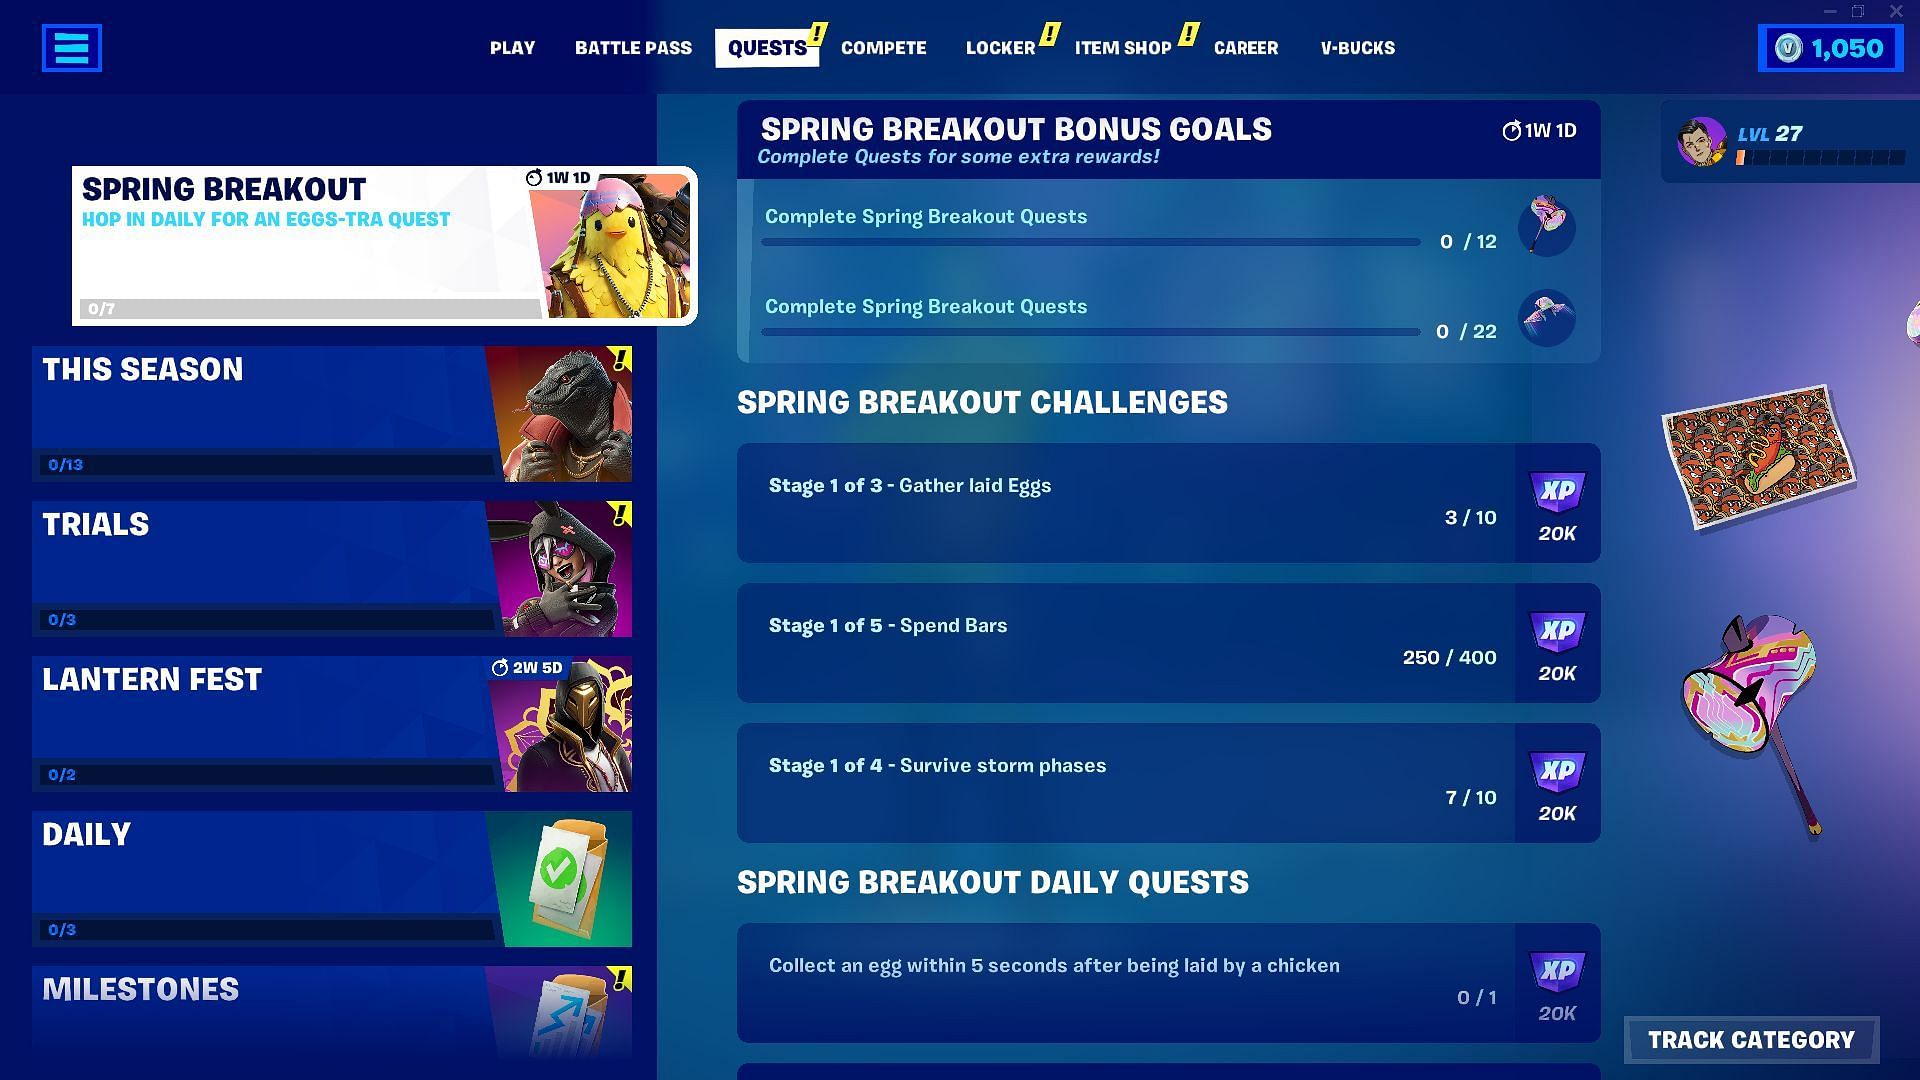 Complete Spring Breakout Quests/Challenges as soon as they appear (Image via Epic Games/Fortnite)